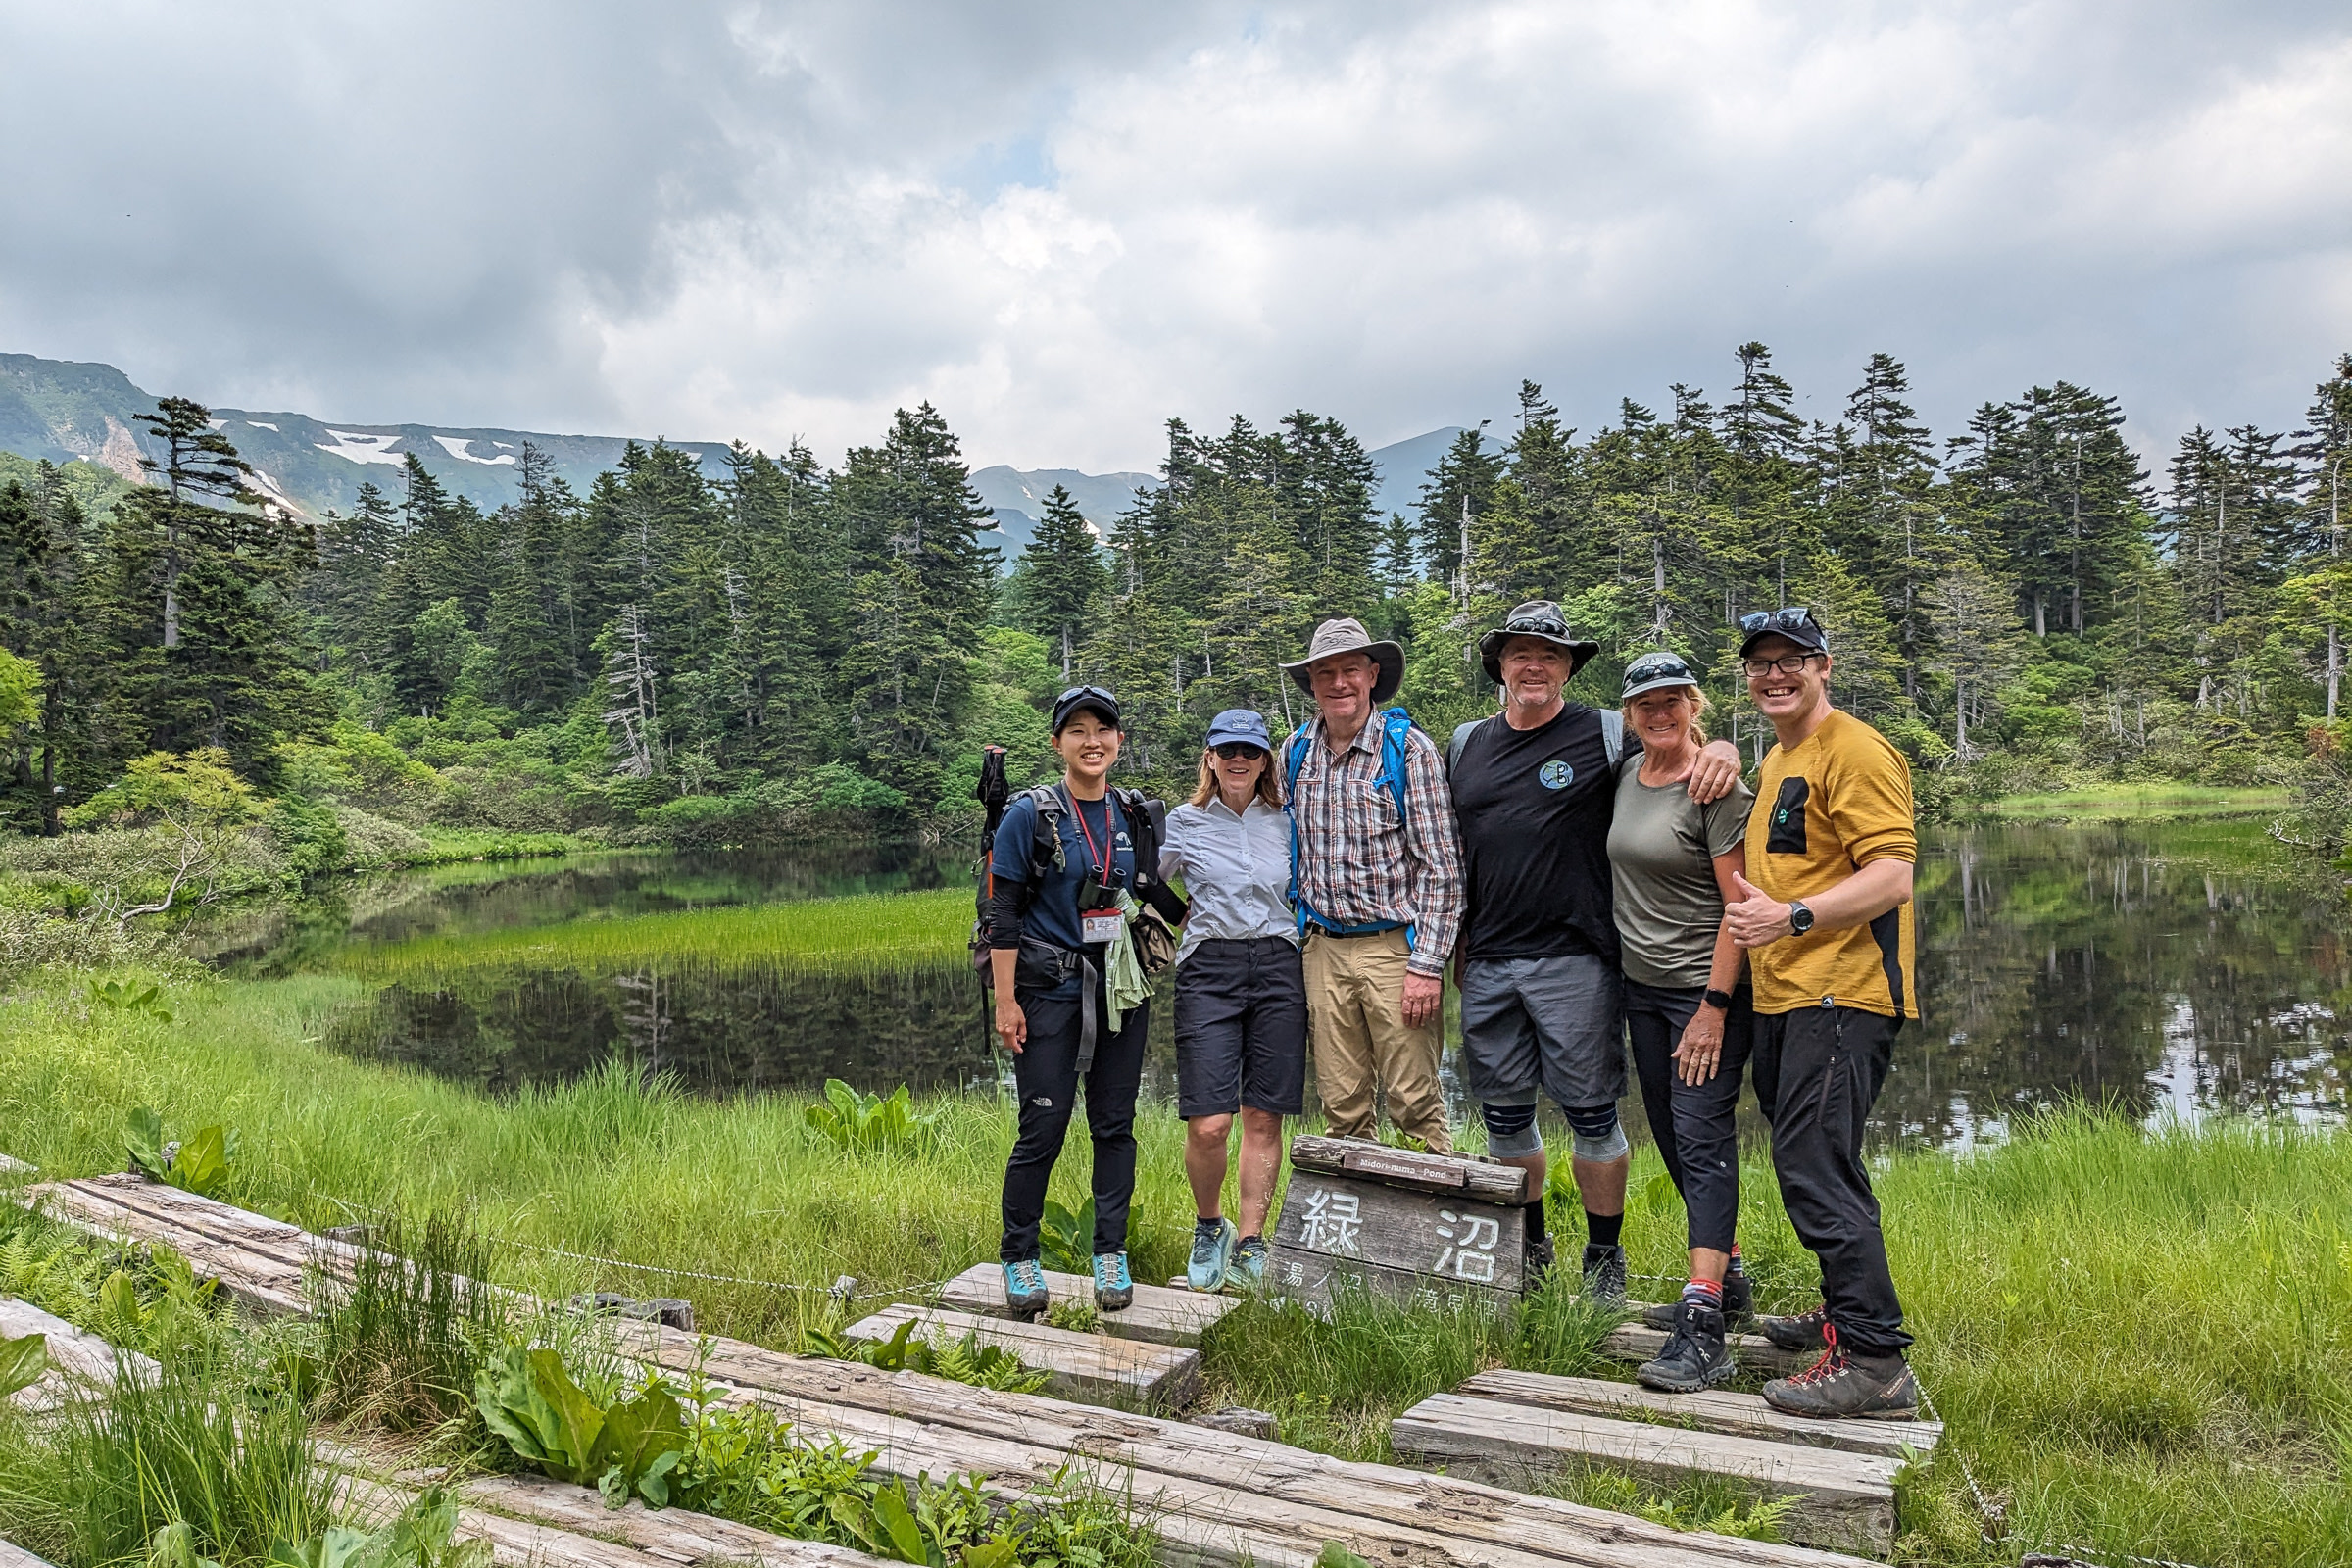 Adventure Hokkaido Guides Yuka and Richard smile with guests. They are standing by a sign reading "Midori Pond" in Japanese with the Midori Pond and alpine scenery behind them.